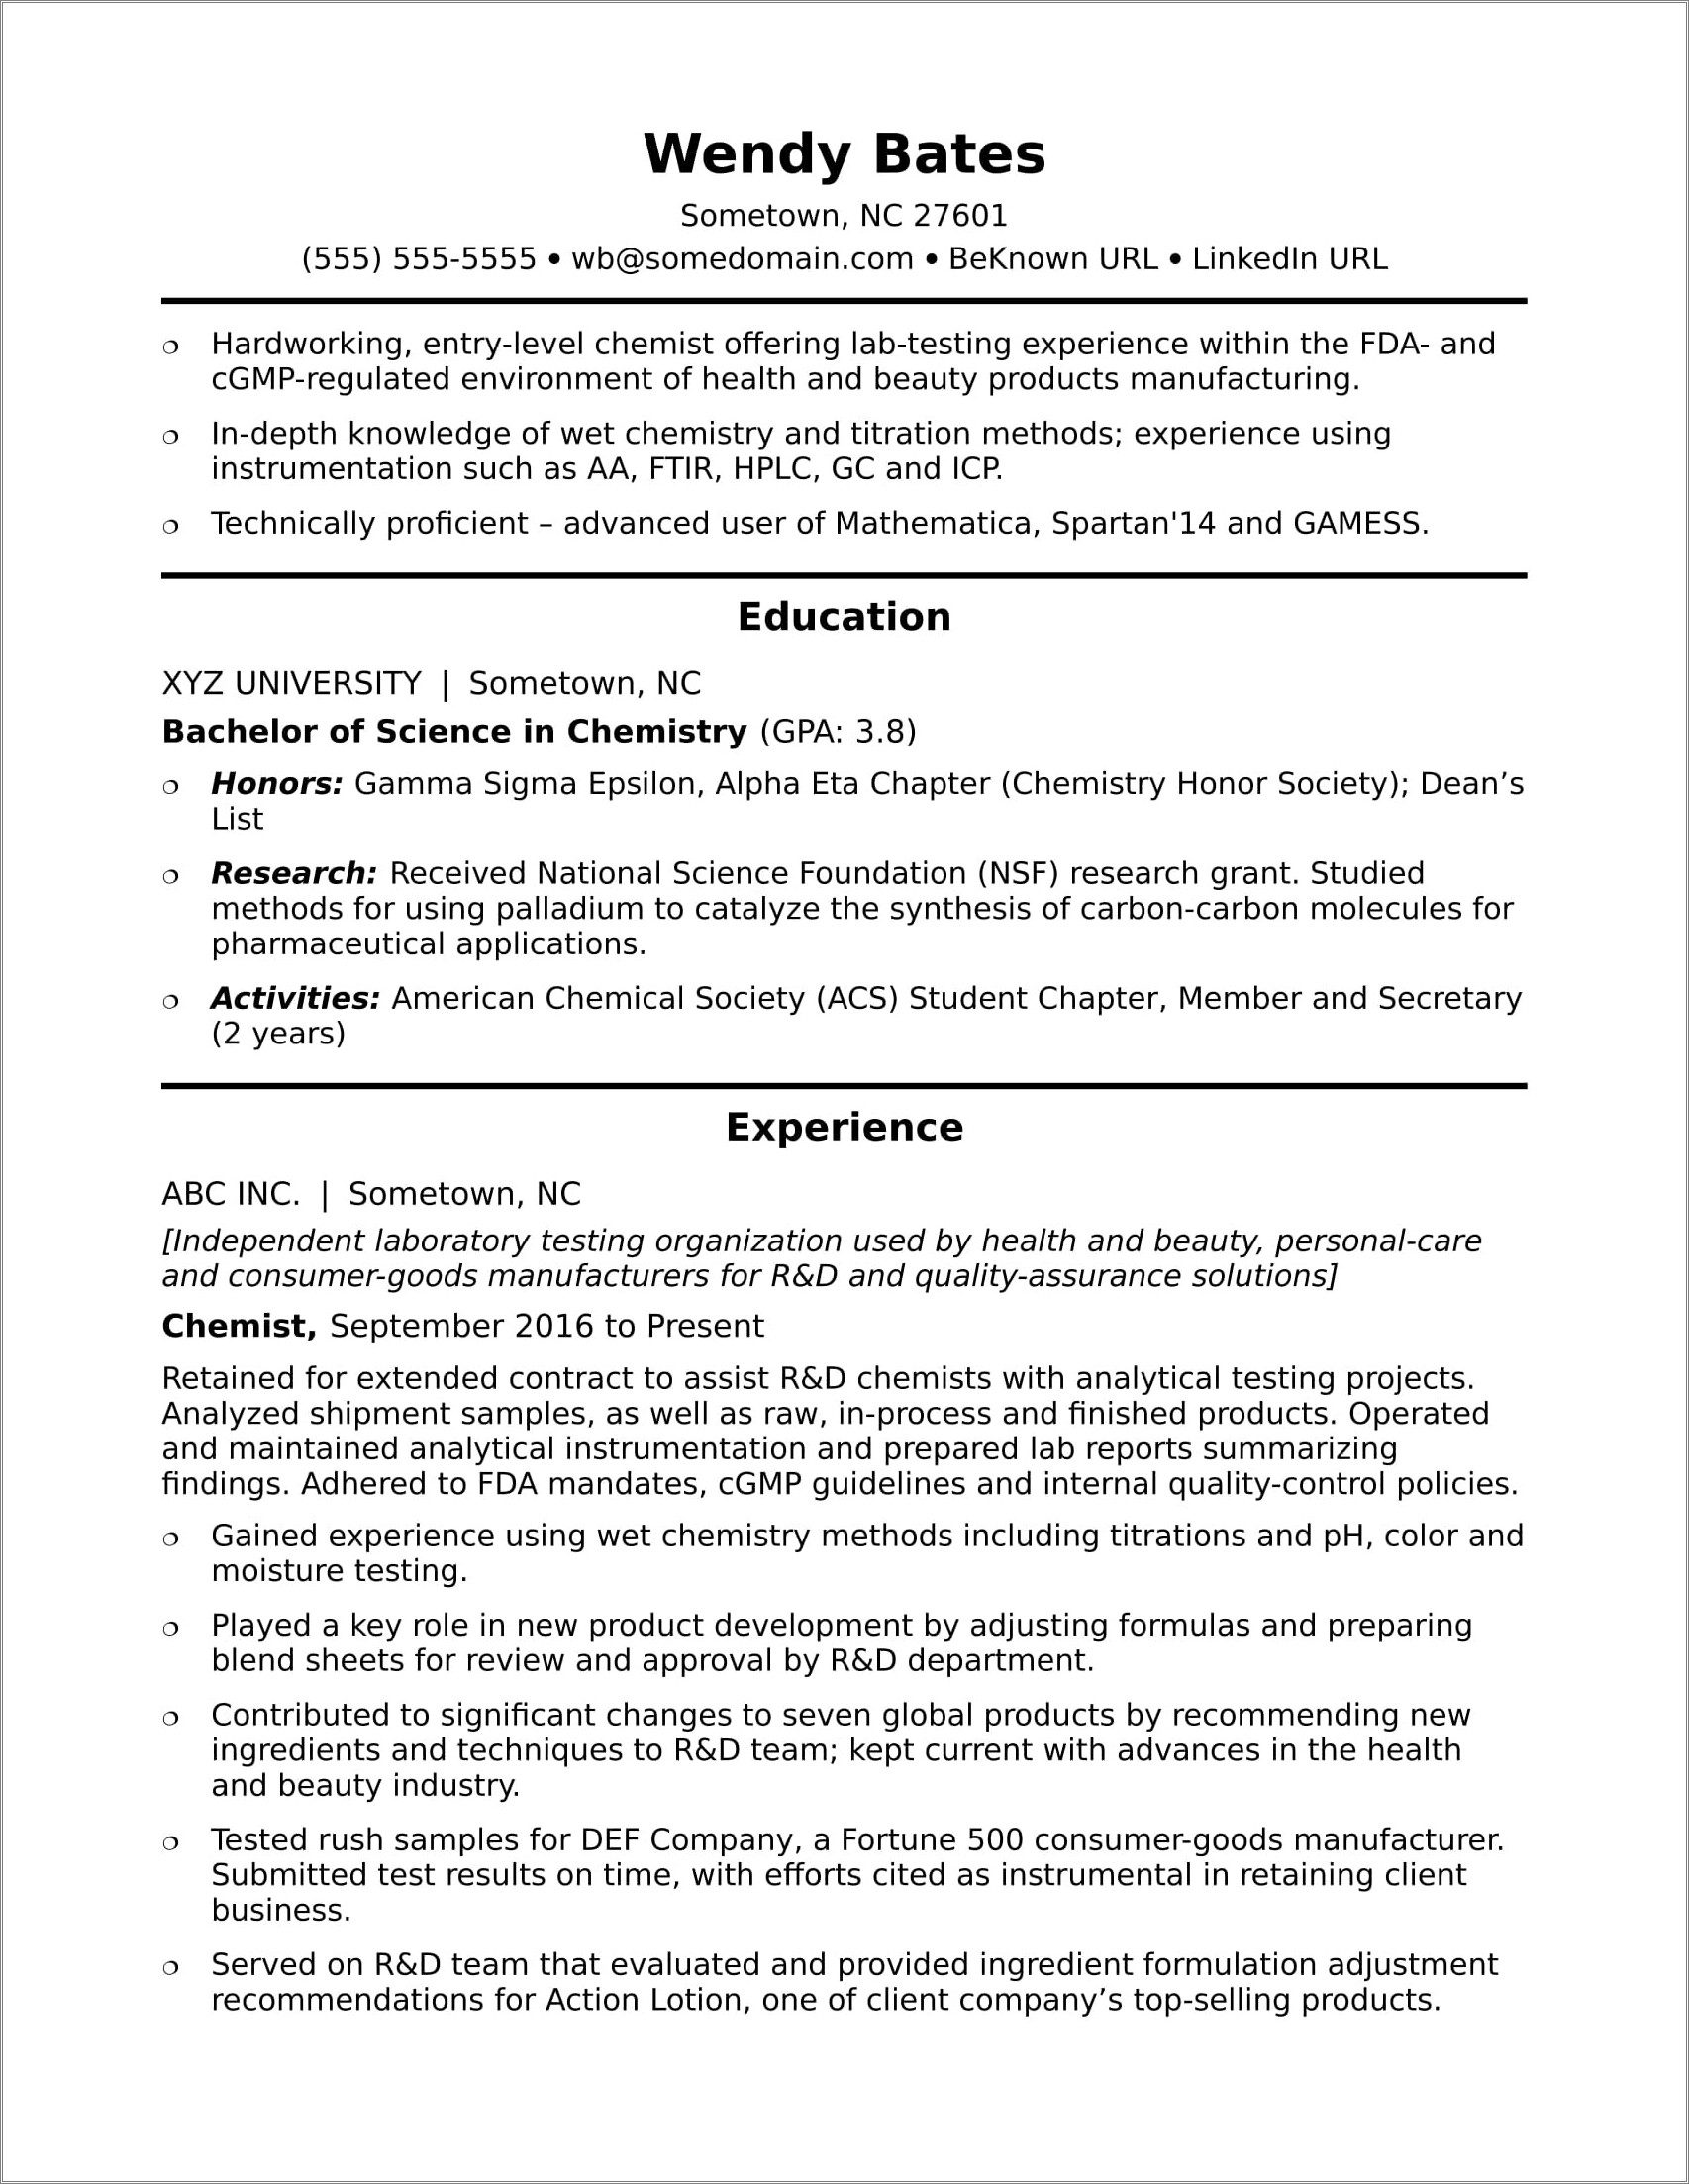 Sample Resume For Entry Level Food Service